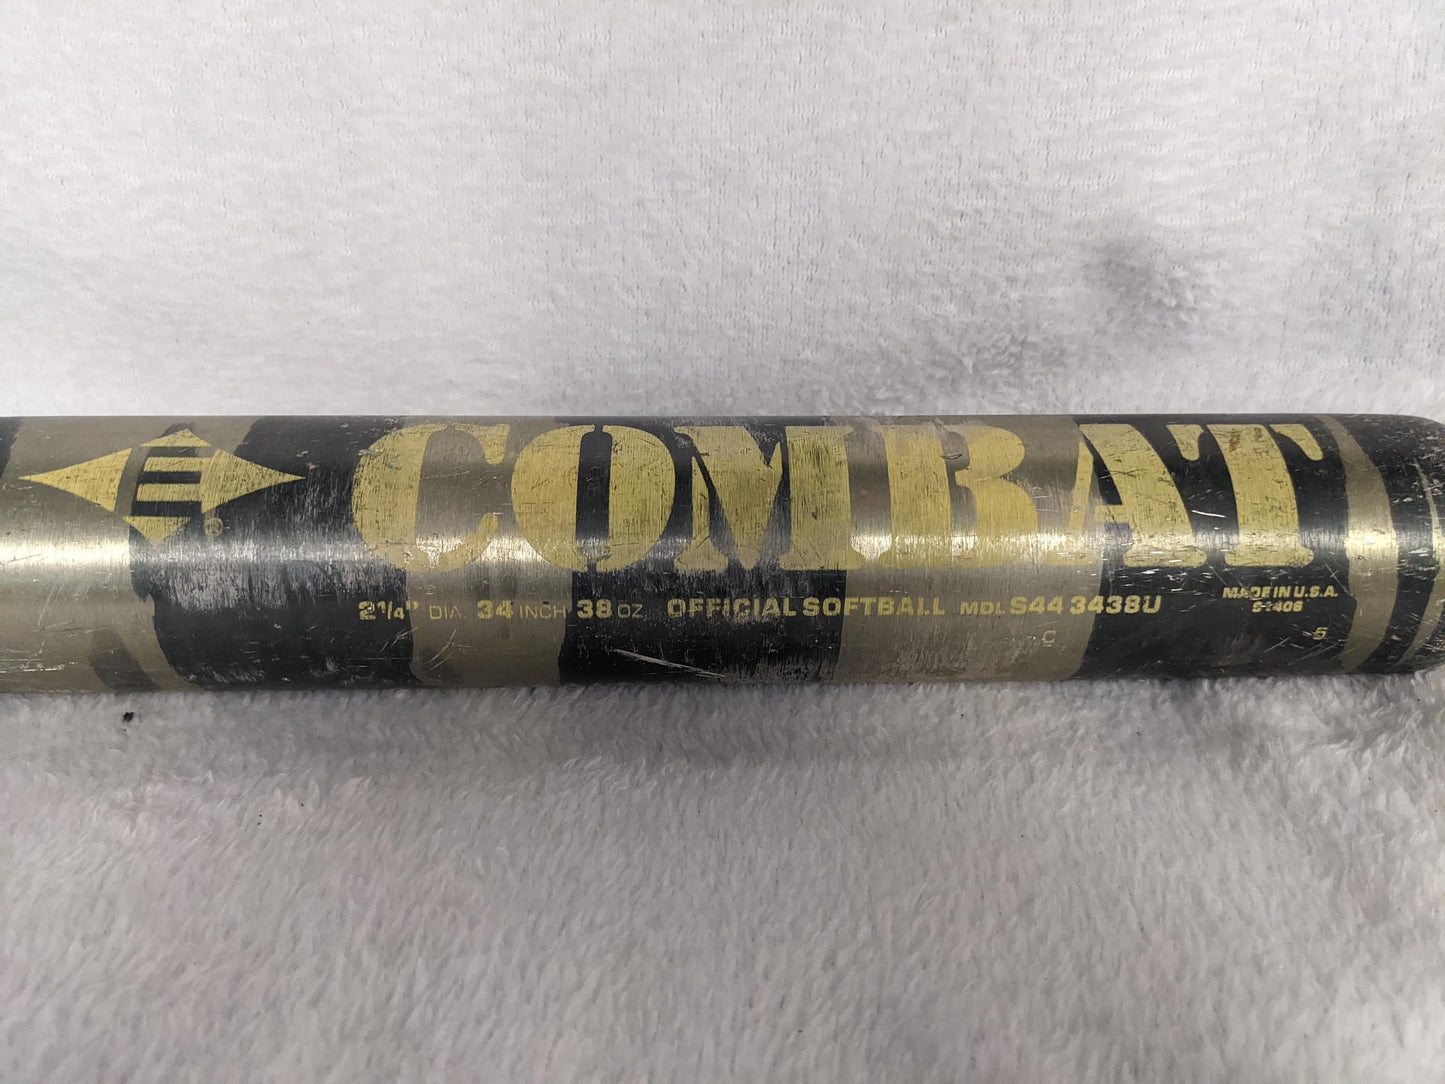 Easton Combat Softball Bat Size 34 In 38 Oz Color Yellow Condition Used